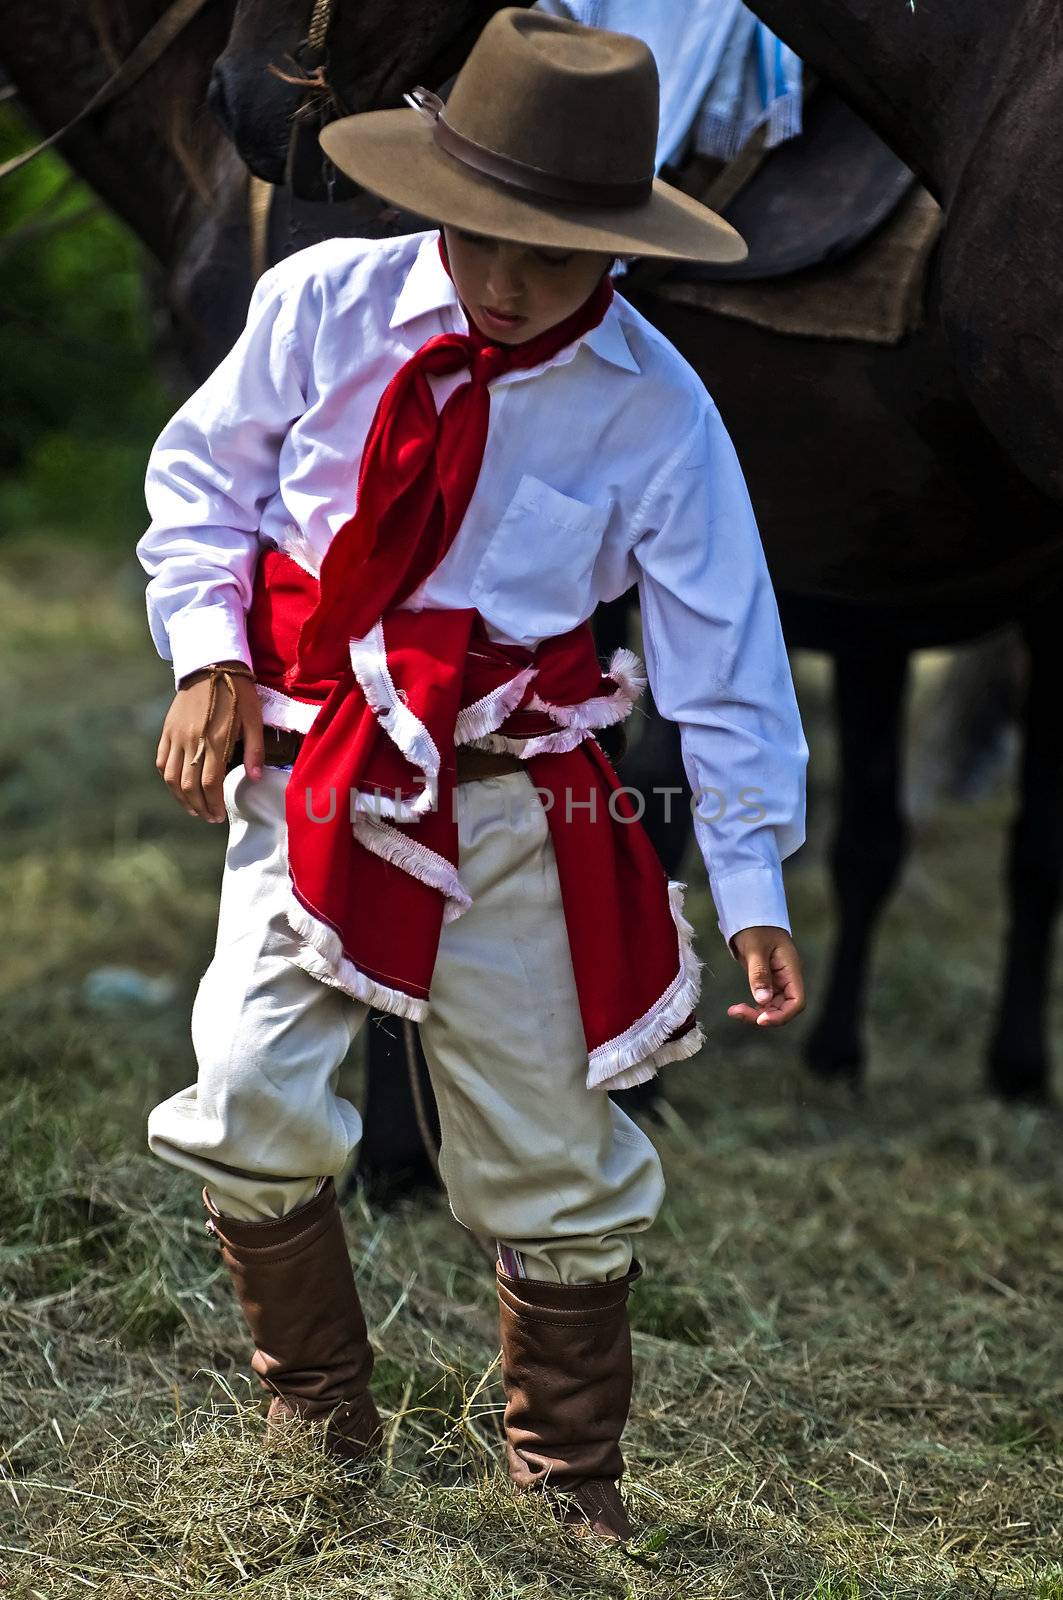 TACUAREMBO, URUGUAY - MAR 5 : Participant in the annual festival "Patria Gaucha" on March 5, 2011 in Tacuarembo, Uruguay. It is one of the biggest festival in South America to celebrate gaucho culture